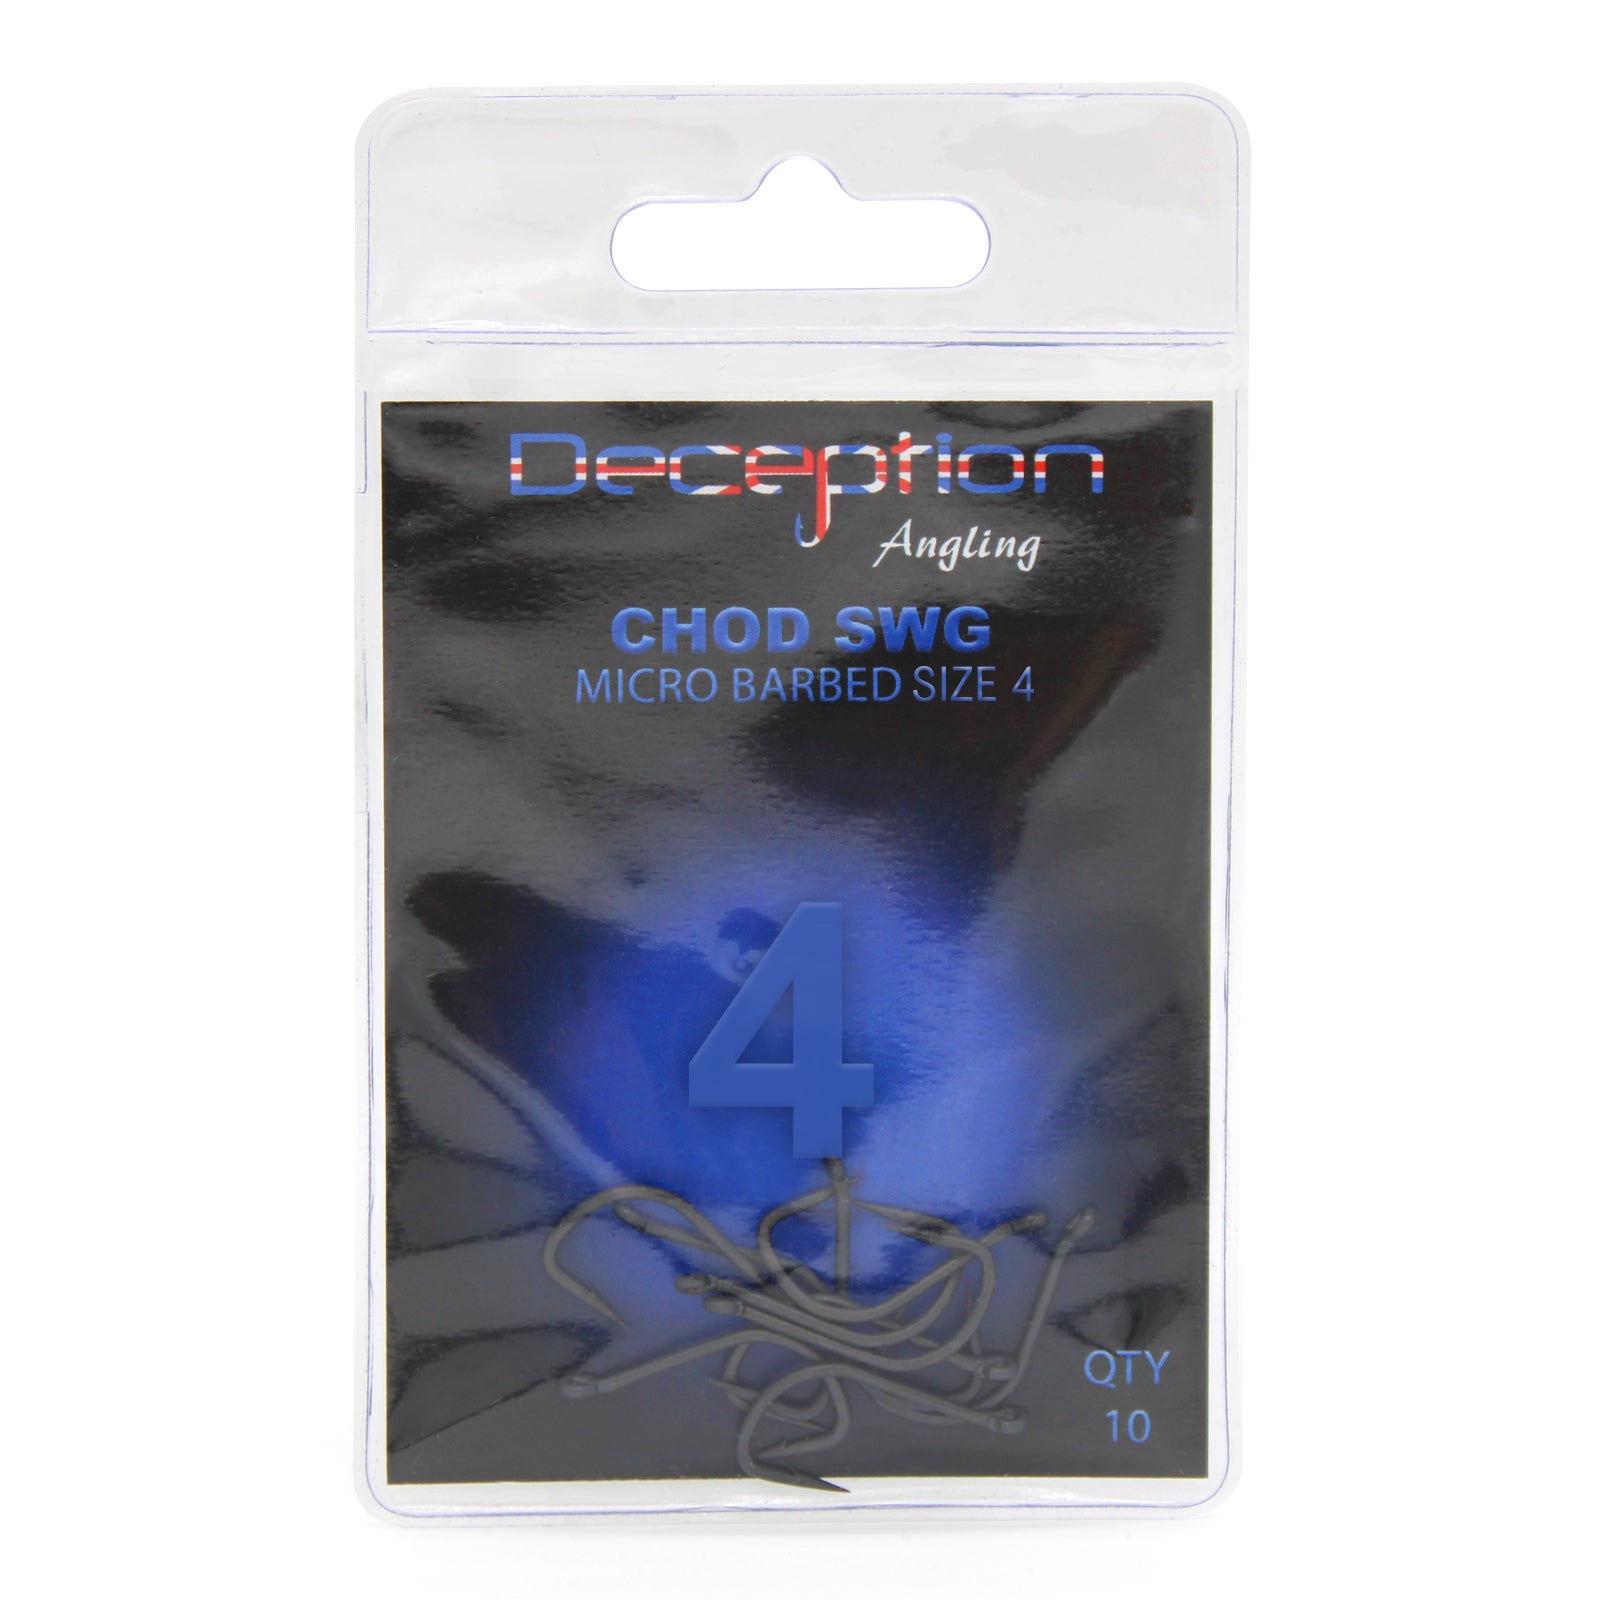 Deception Angling Chod SWG Micro Barbed Fishing Hooks Size 4 - Pack of 10